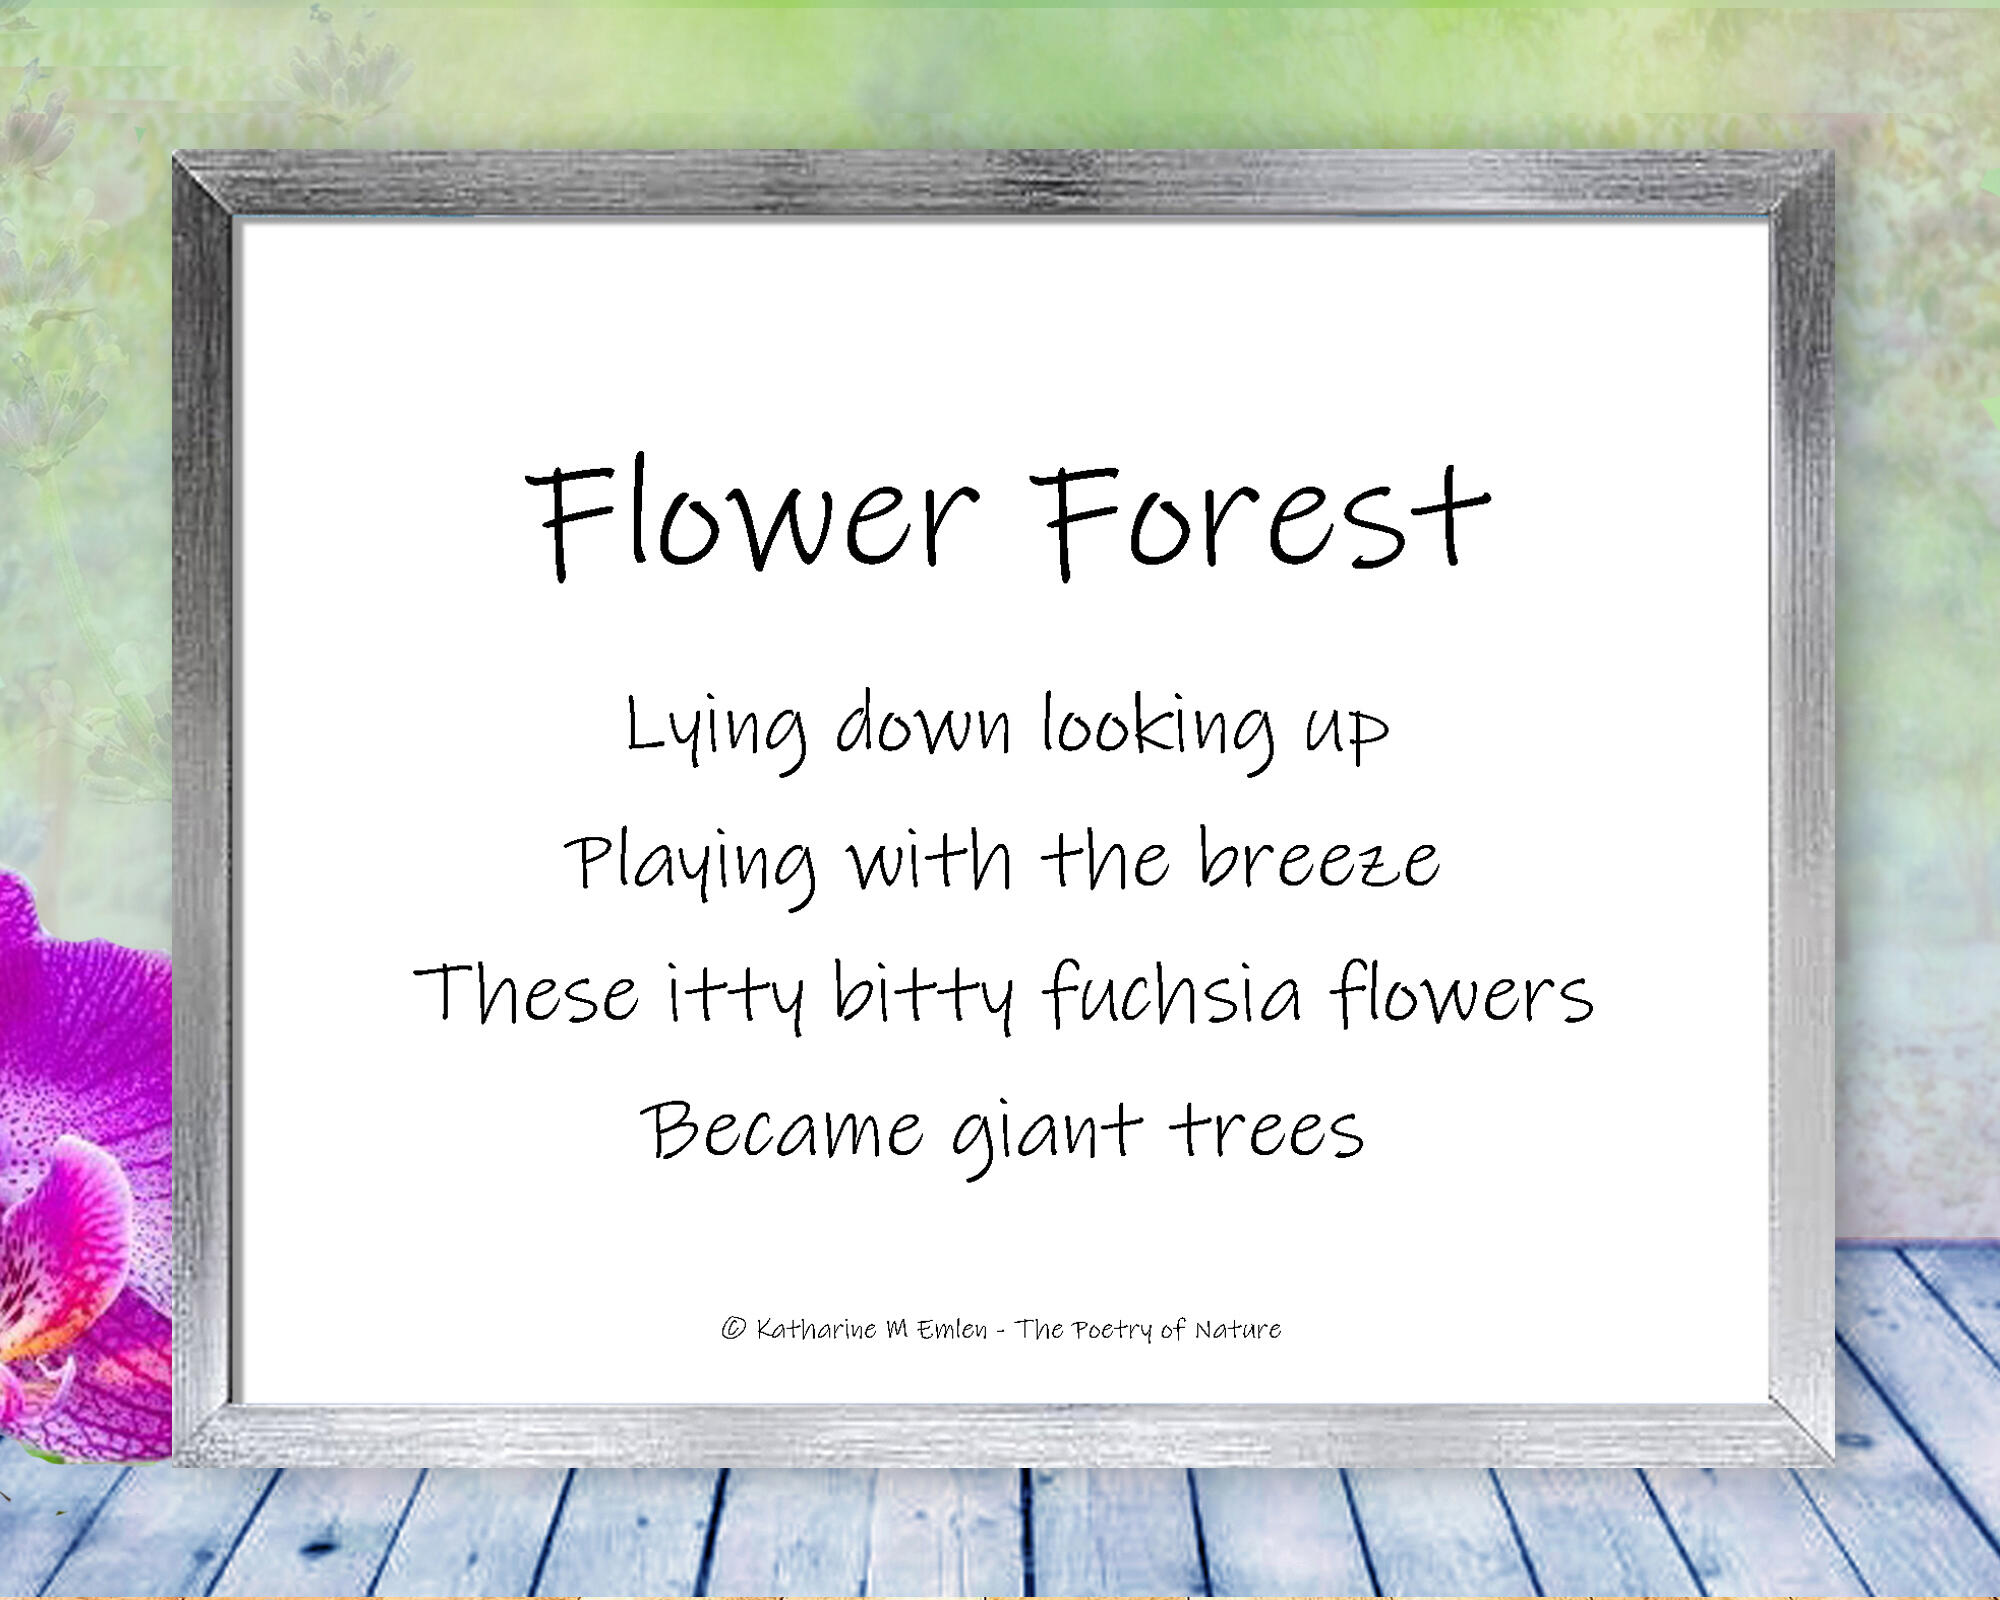 Poem for Flower Forest - Beautiful pink blossoms tower overhead in this happy, magical, nature photograph. Print with Poem - Flower Forest - by The Poetry of Nature